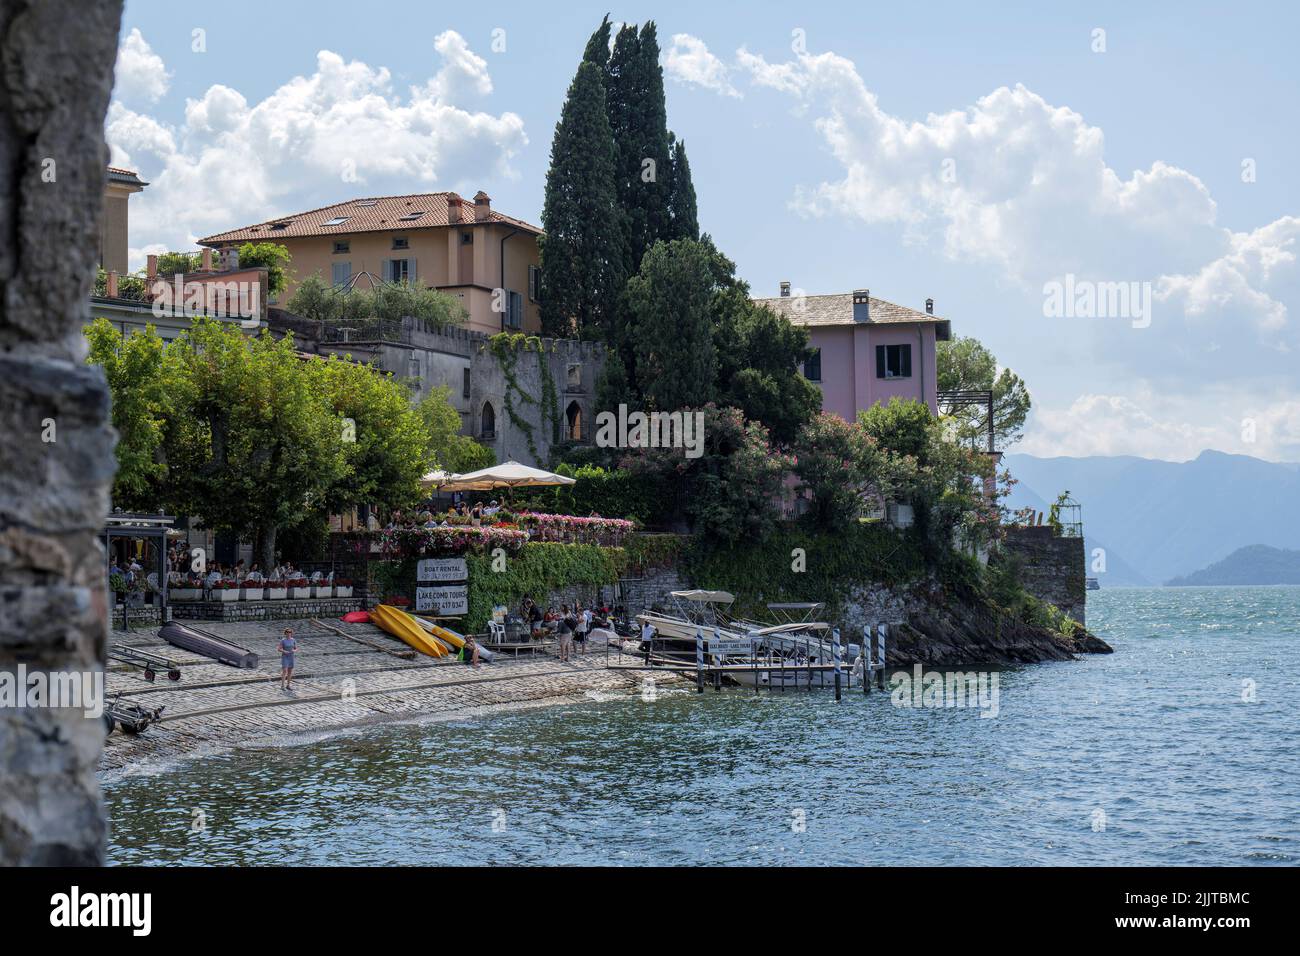 The scenic harbor of Varenna City at Lake Como in Italy under a blue sky Stock Photo